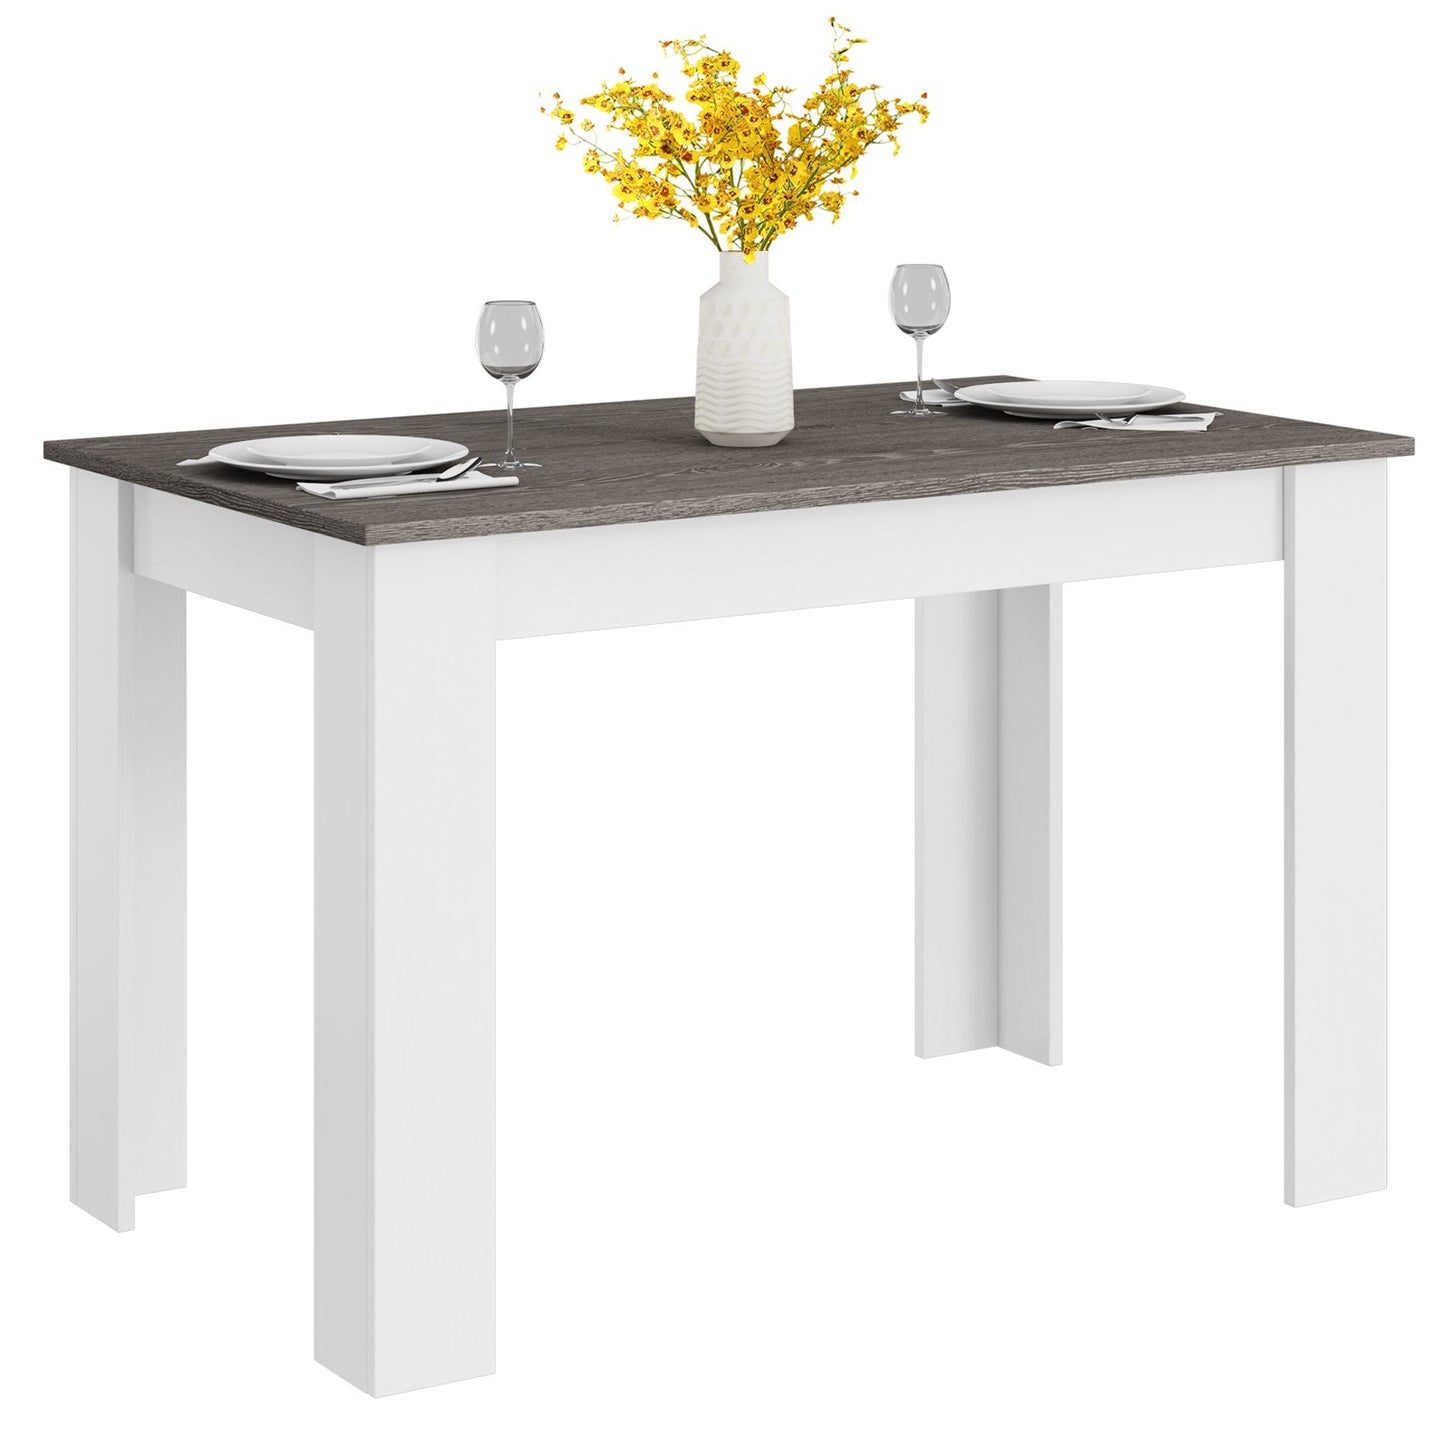 47 Inches Dining Table for Kitchen and Dining Room, Dark Gray